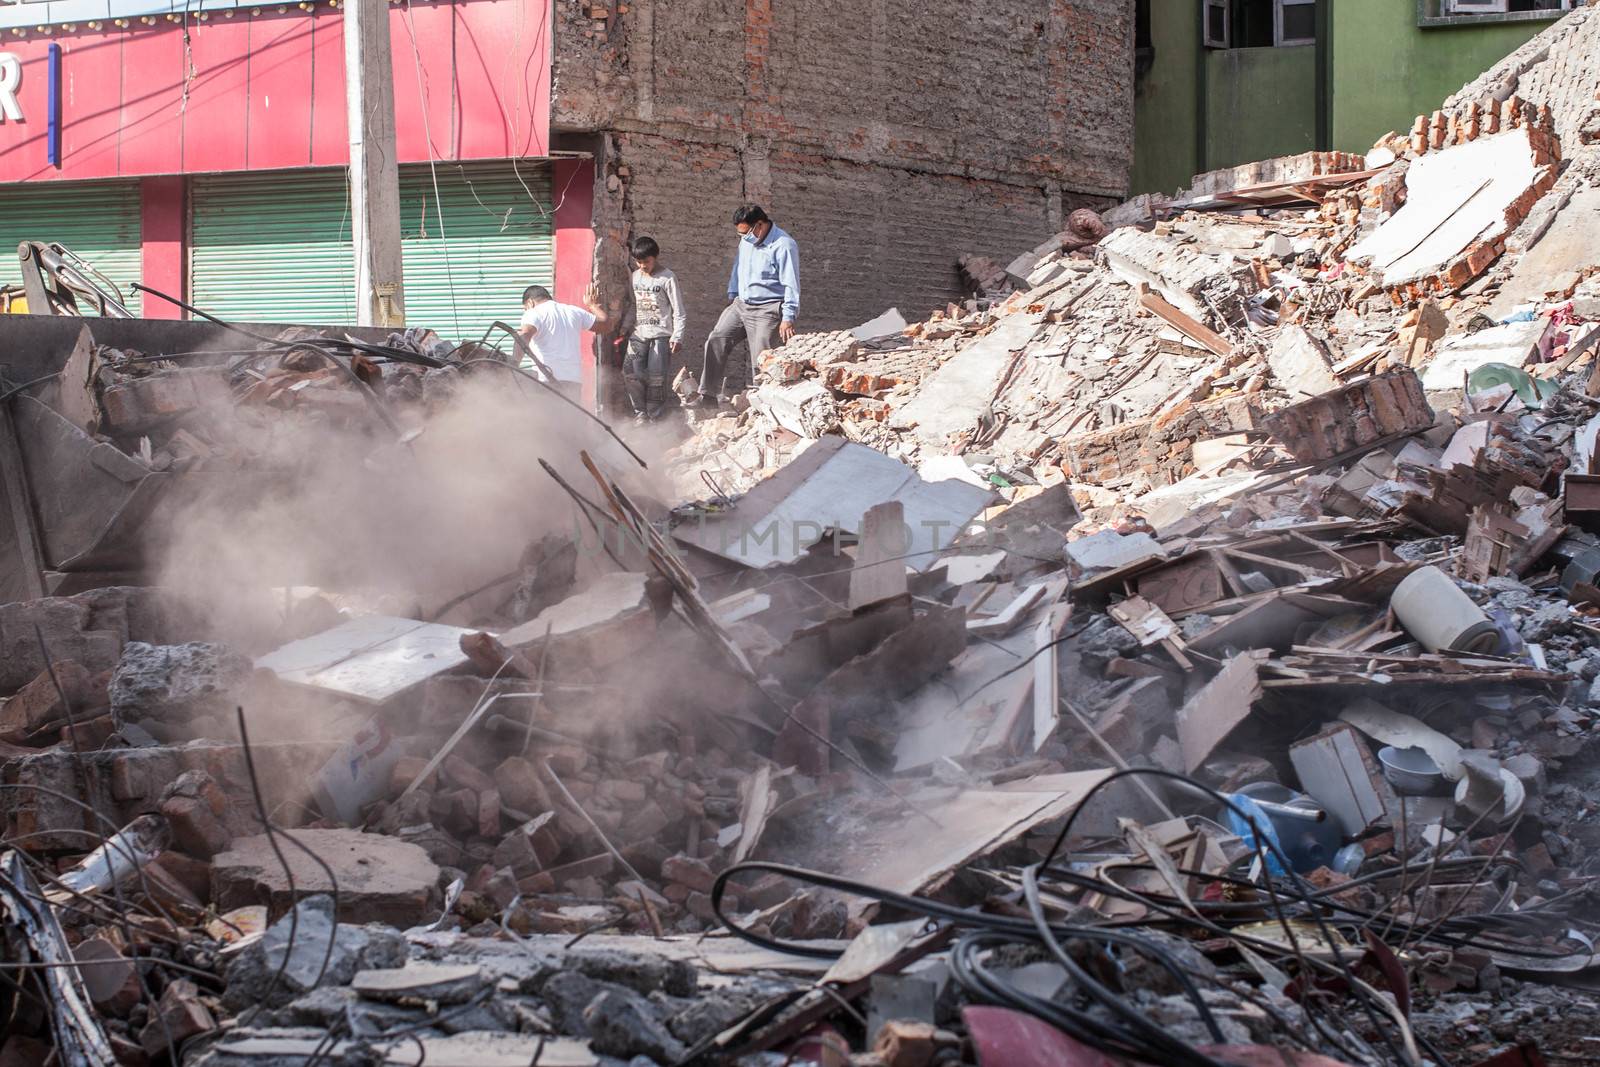 NEPAL,Kathmandu: A collapsed building covers the Naya Bazar Marg road in Kathmandu, Nepal on May 12, 2015, after being destroyed by a large earthquake.More than 8,000 people died in the quake and some 3.5 million were left homeless. 